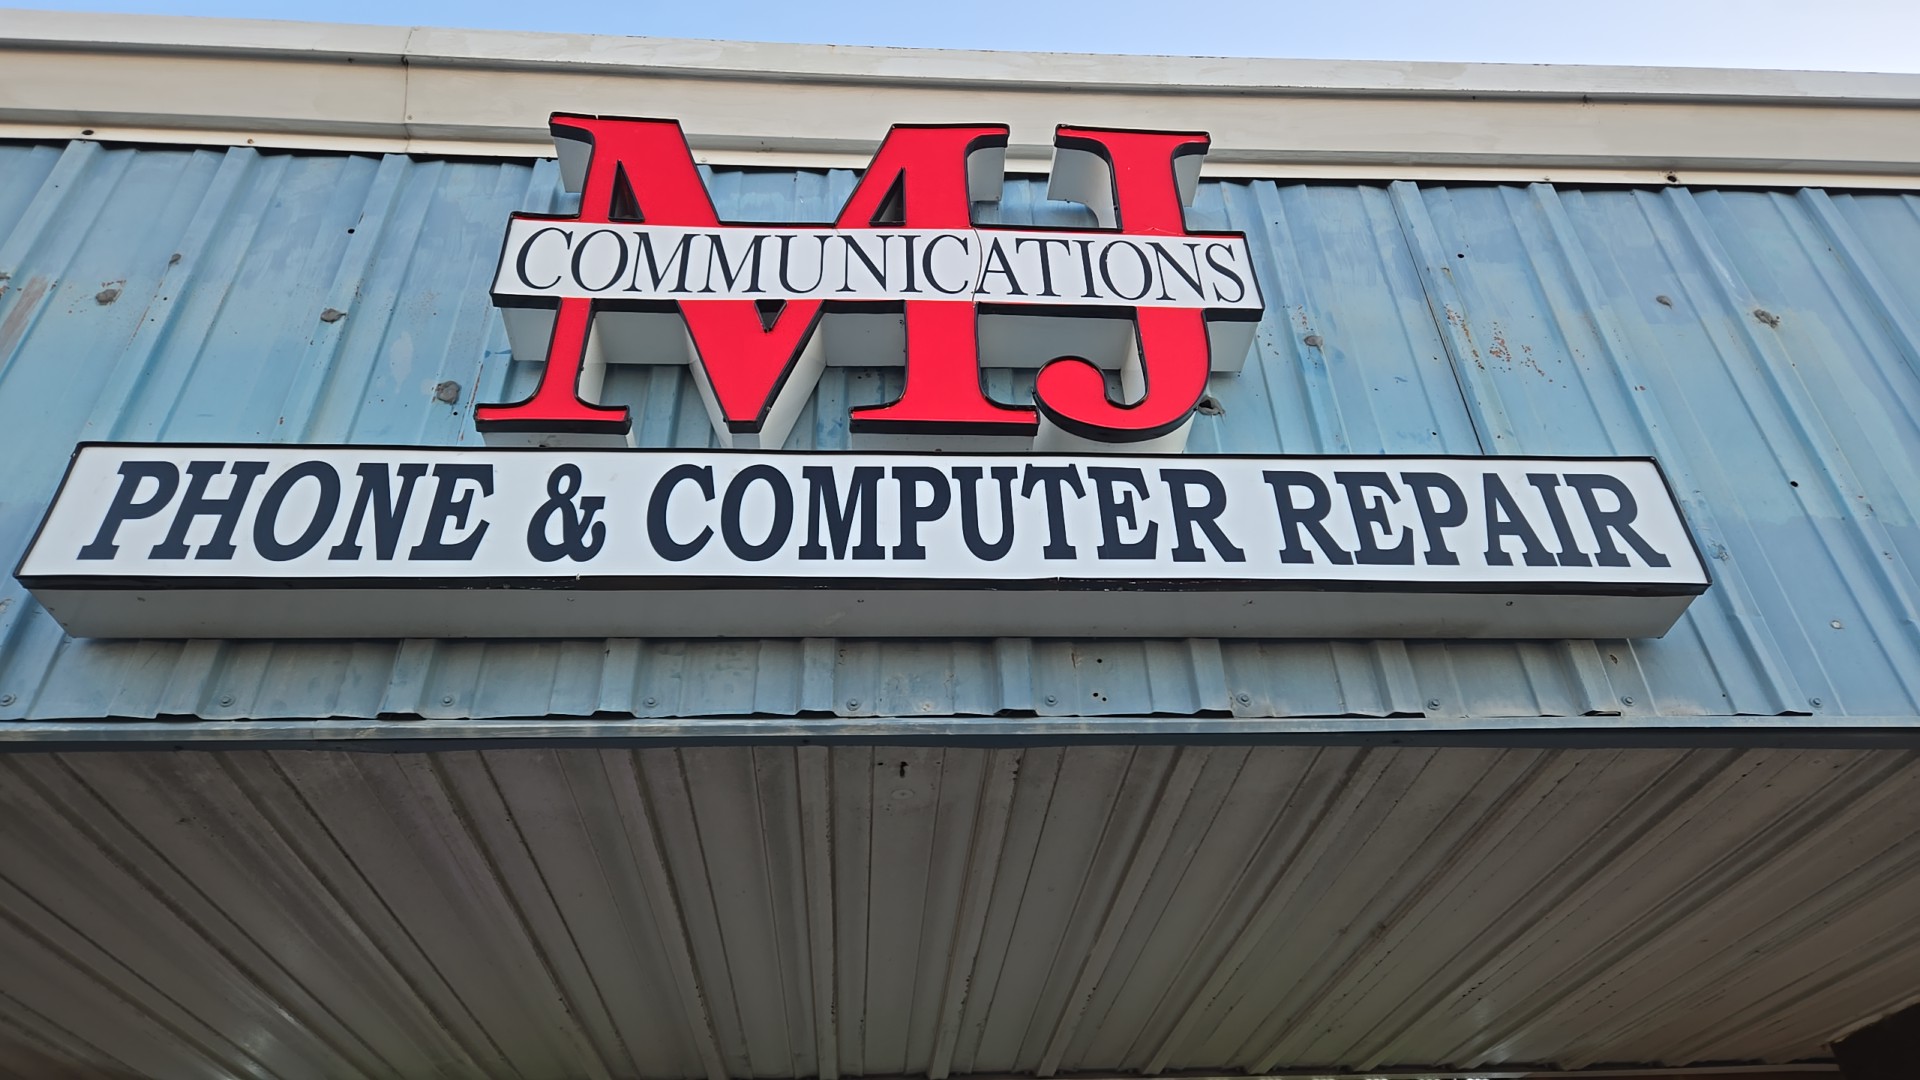 MJ FIXIT (MJ Communications) Cellphone and Computer services